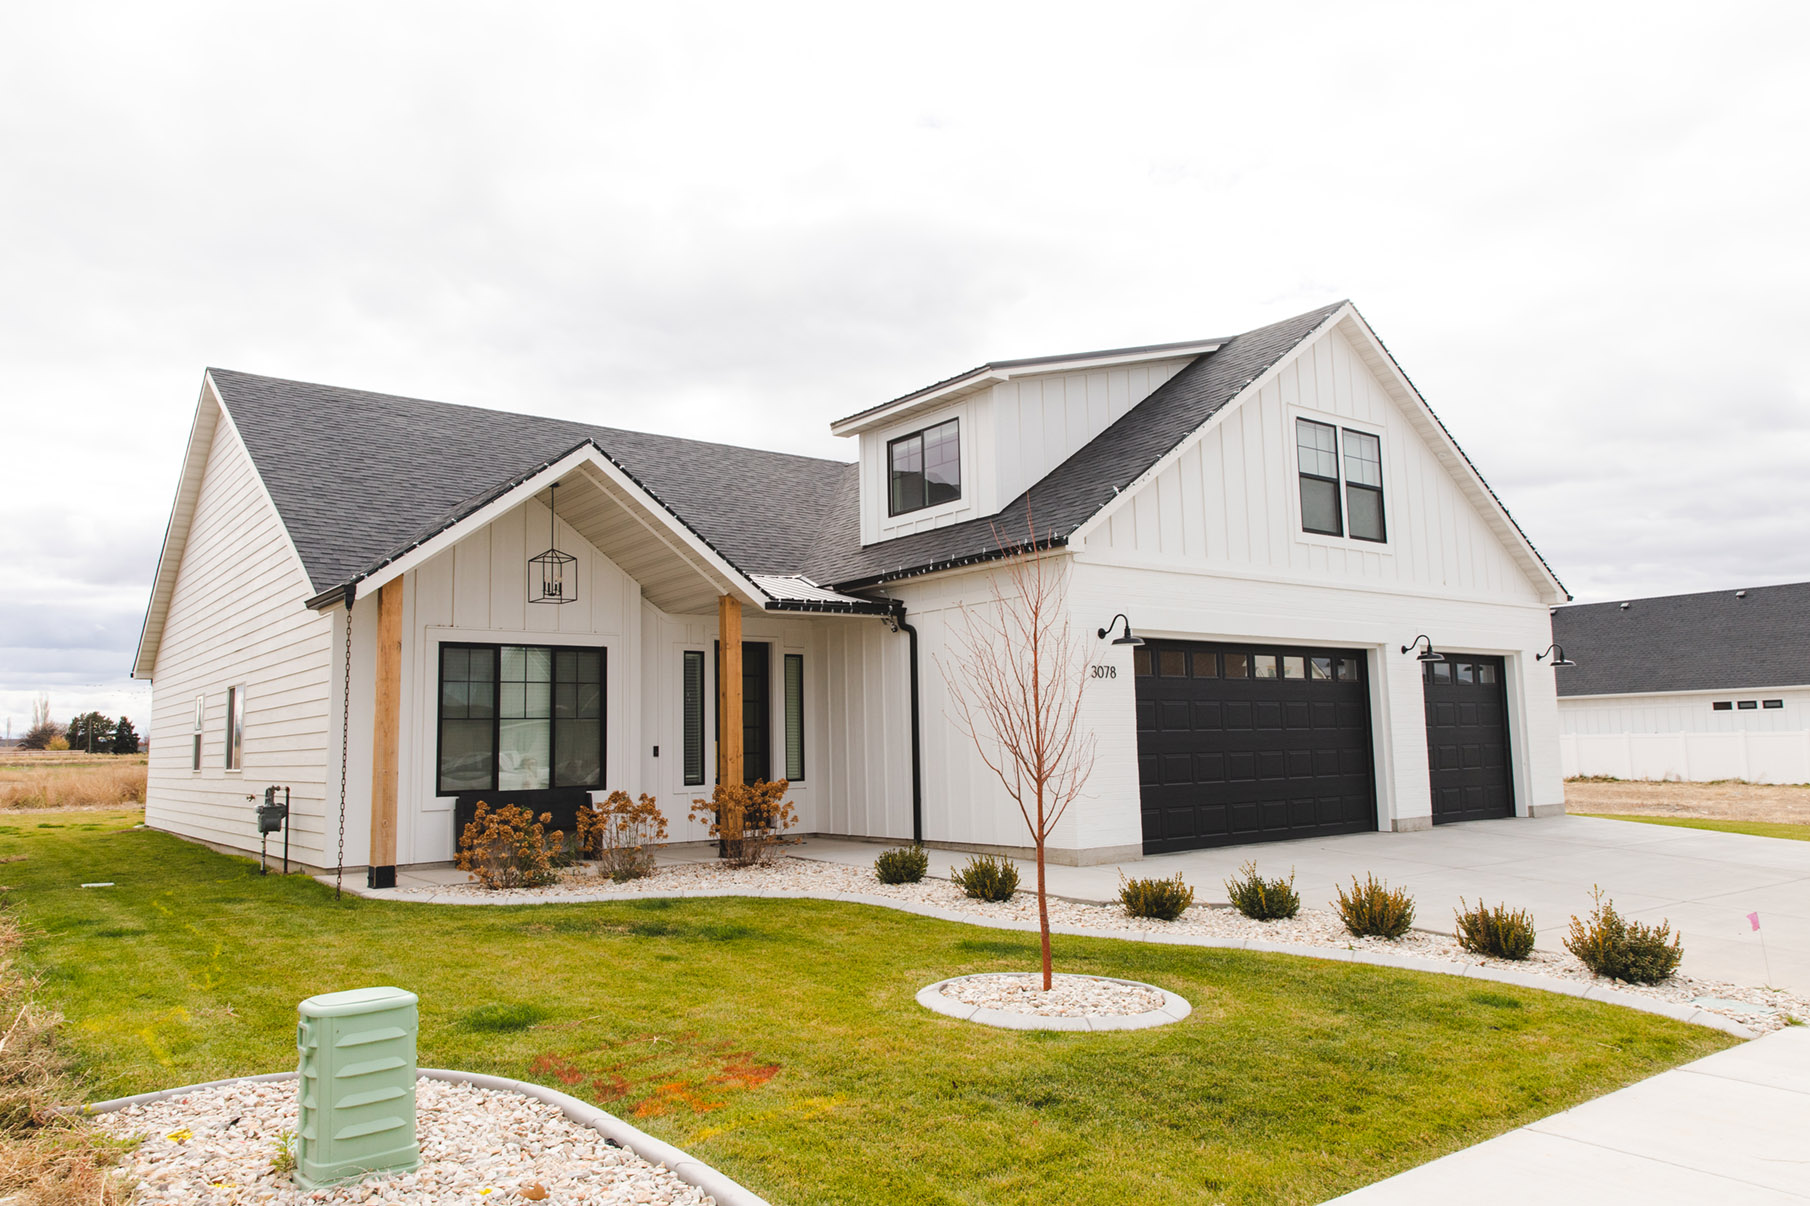 Exterior of the Eaves, a custom dream home in Twin Falls, ID.